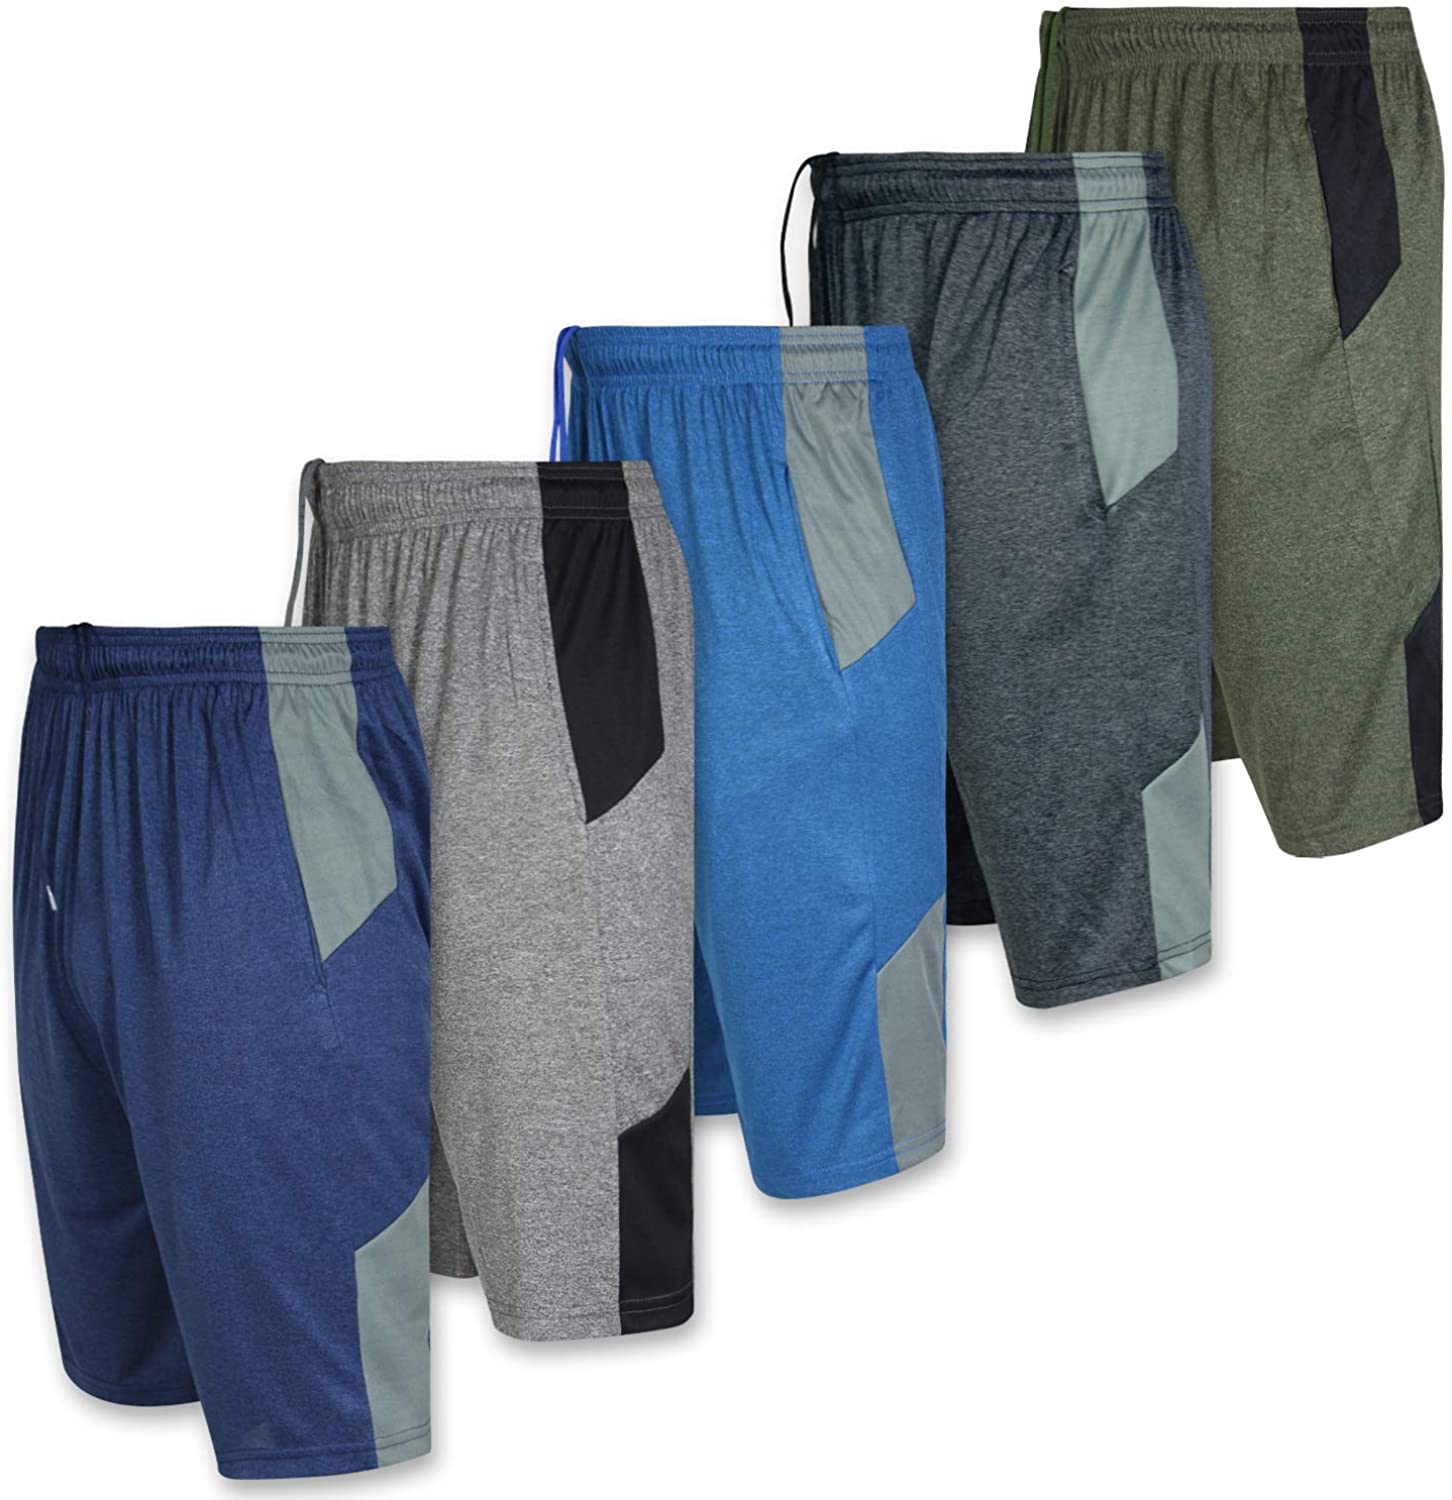 5 Pack:Men's Dry-Fit Sweat Resistant Active Athletic Performance Shorts -  Set E - CT18HZ2K9CA Size Small